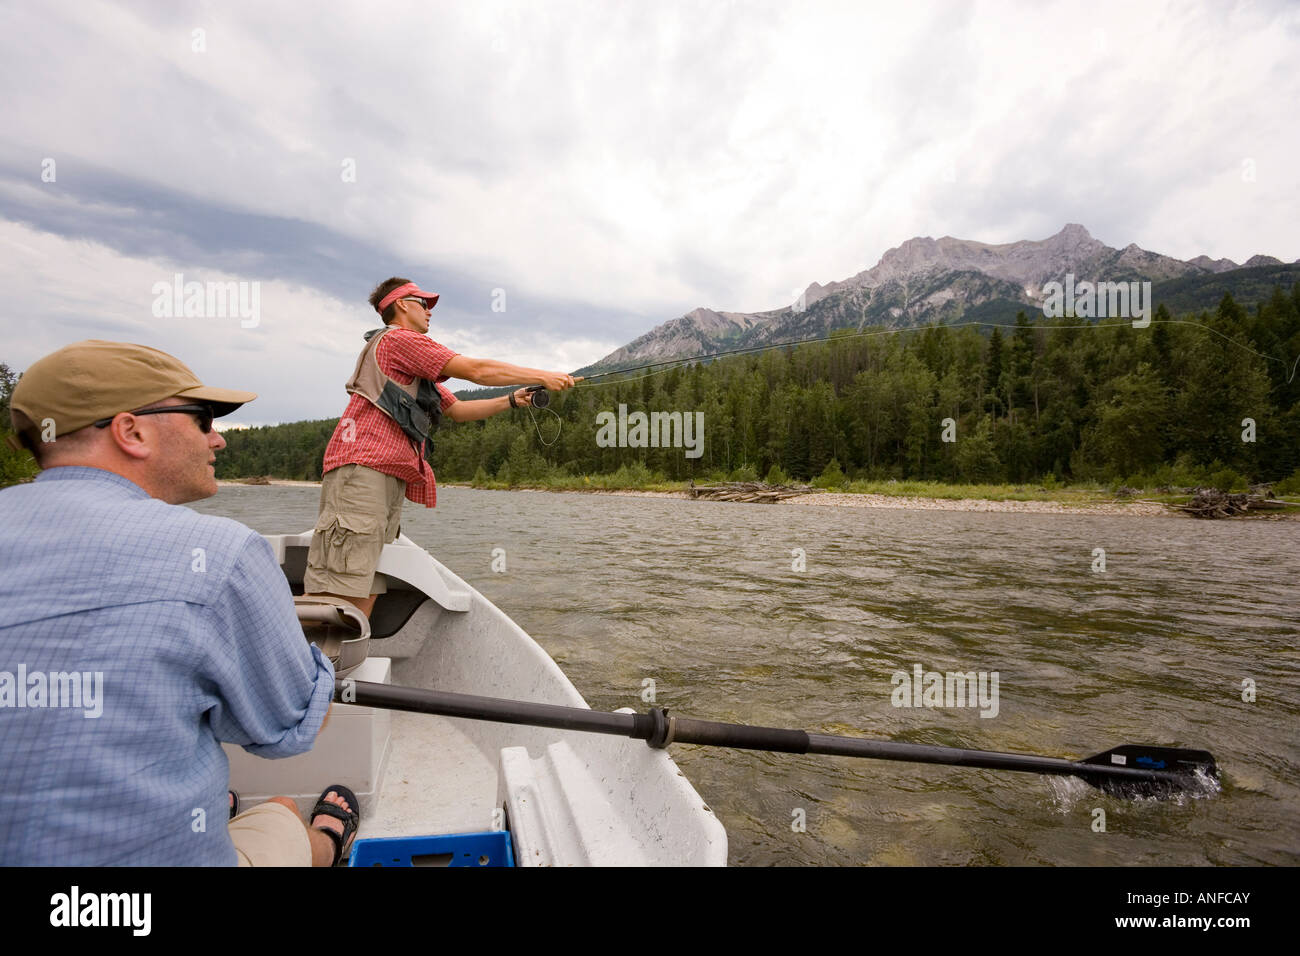 Young men fly fishing on the Elk River from a dory while guide watches, Fernie, East Kootenays, British Columbia, Canada. Stock Photo